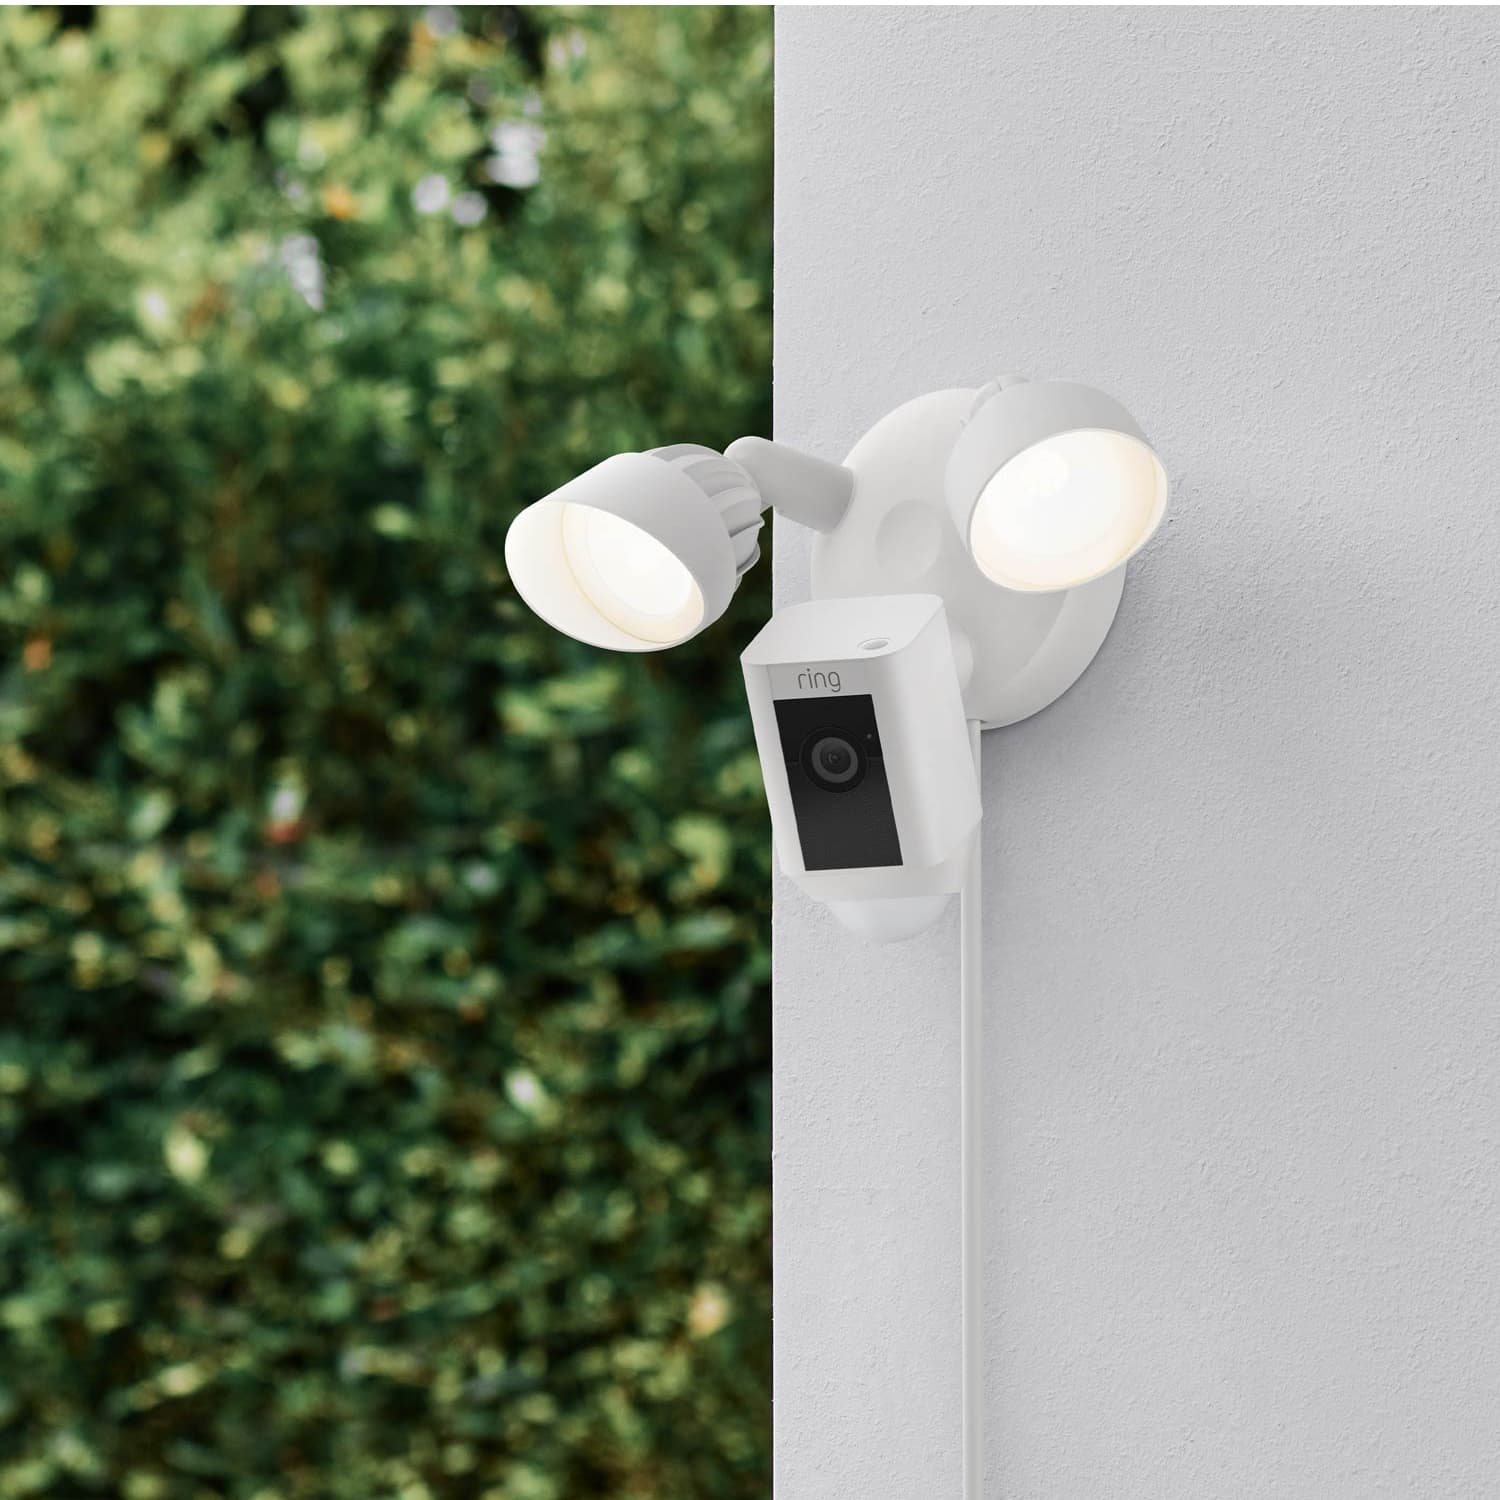 Floodlight Cam Plug-In Plus - Floodlight Cam Plus, Plug-In model in white mounted to exterior corner of home with both lights on.